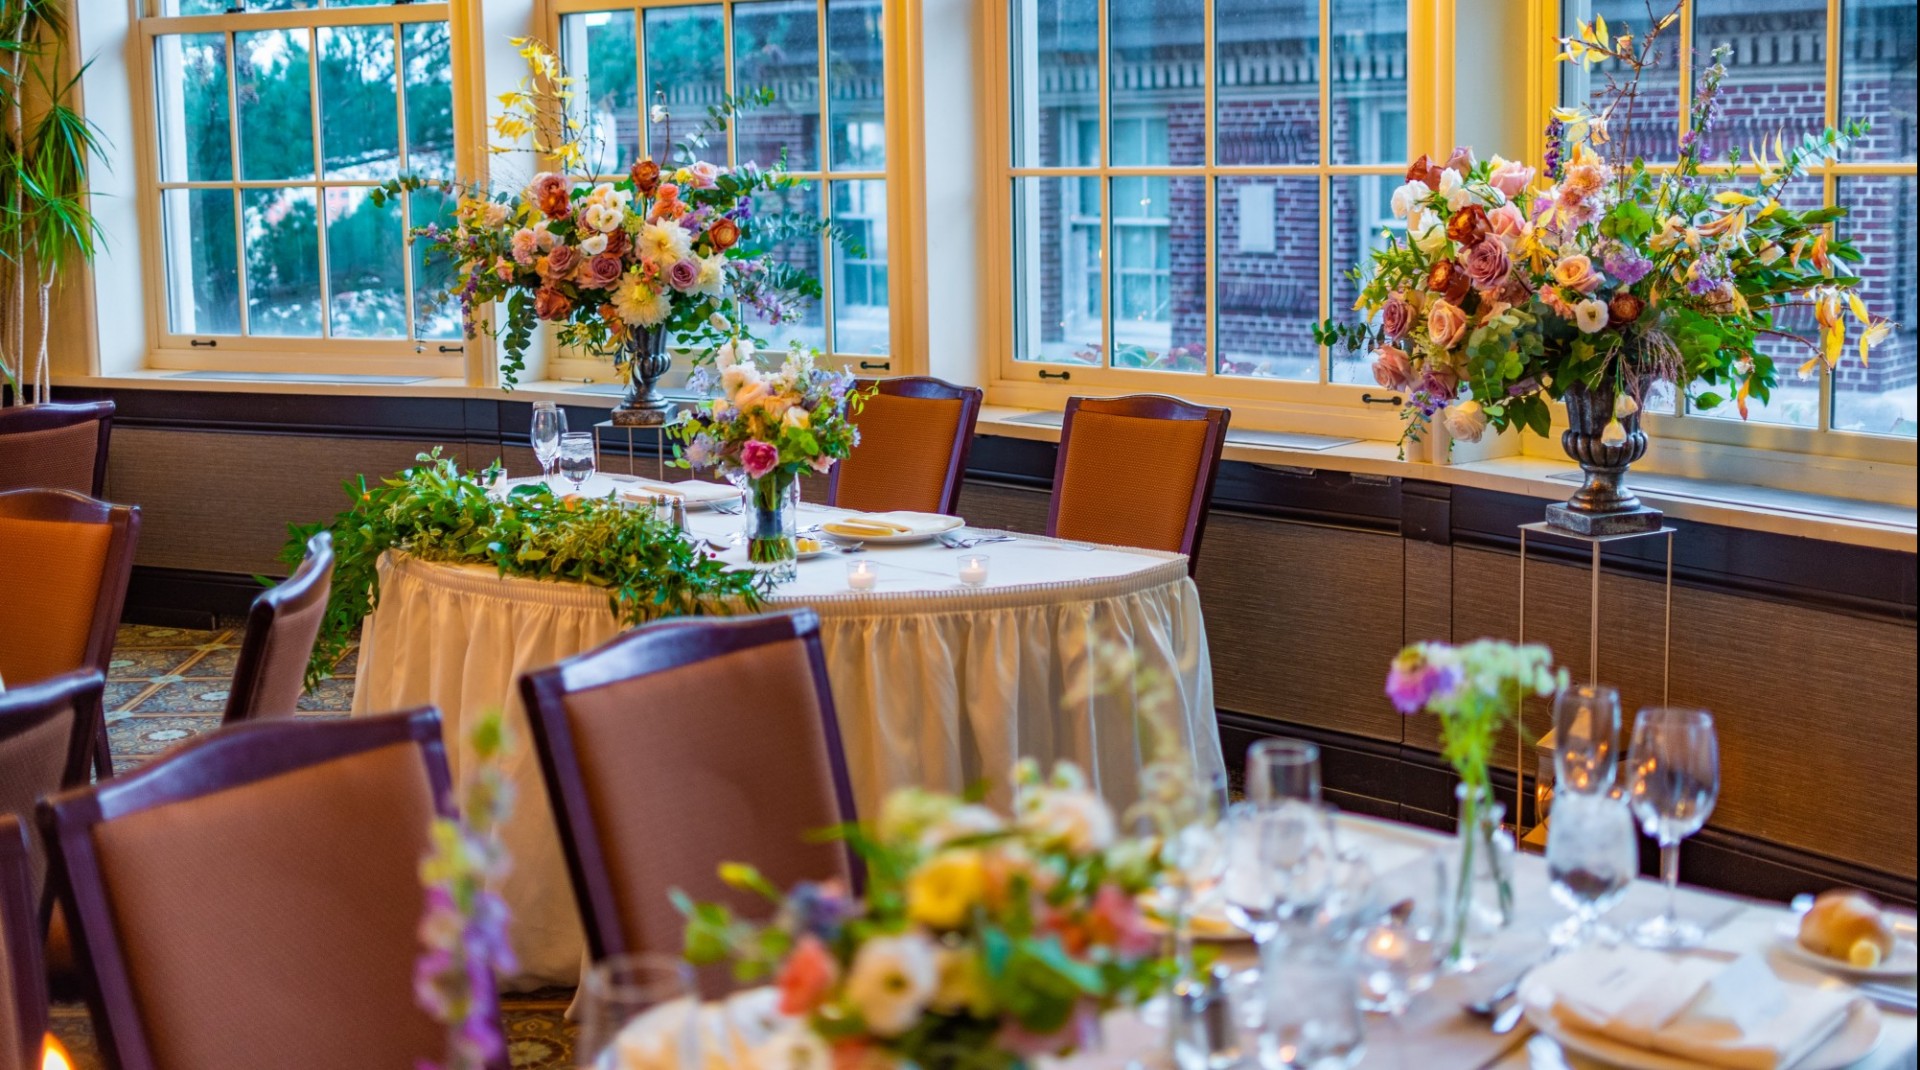 Colorful flowers adorn the sweetheart table